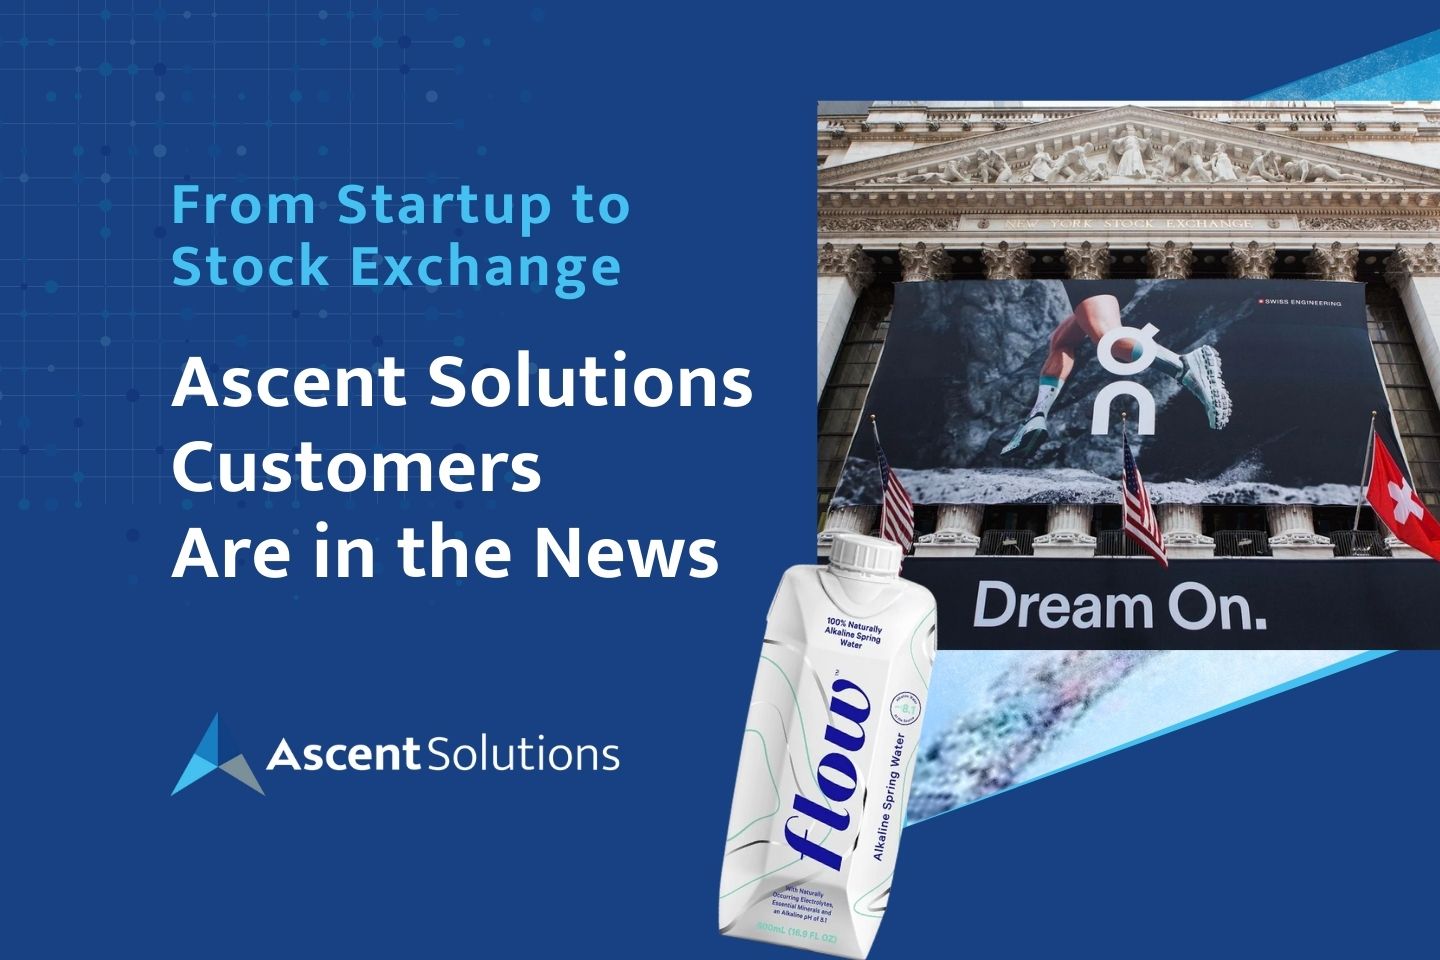 From Startup to Stock Exchange Ascent Solutions Customers Are in the News on running flow water